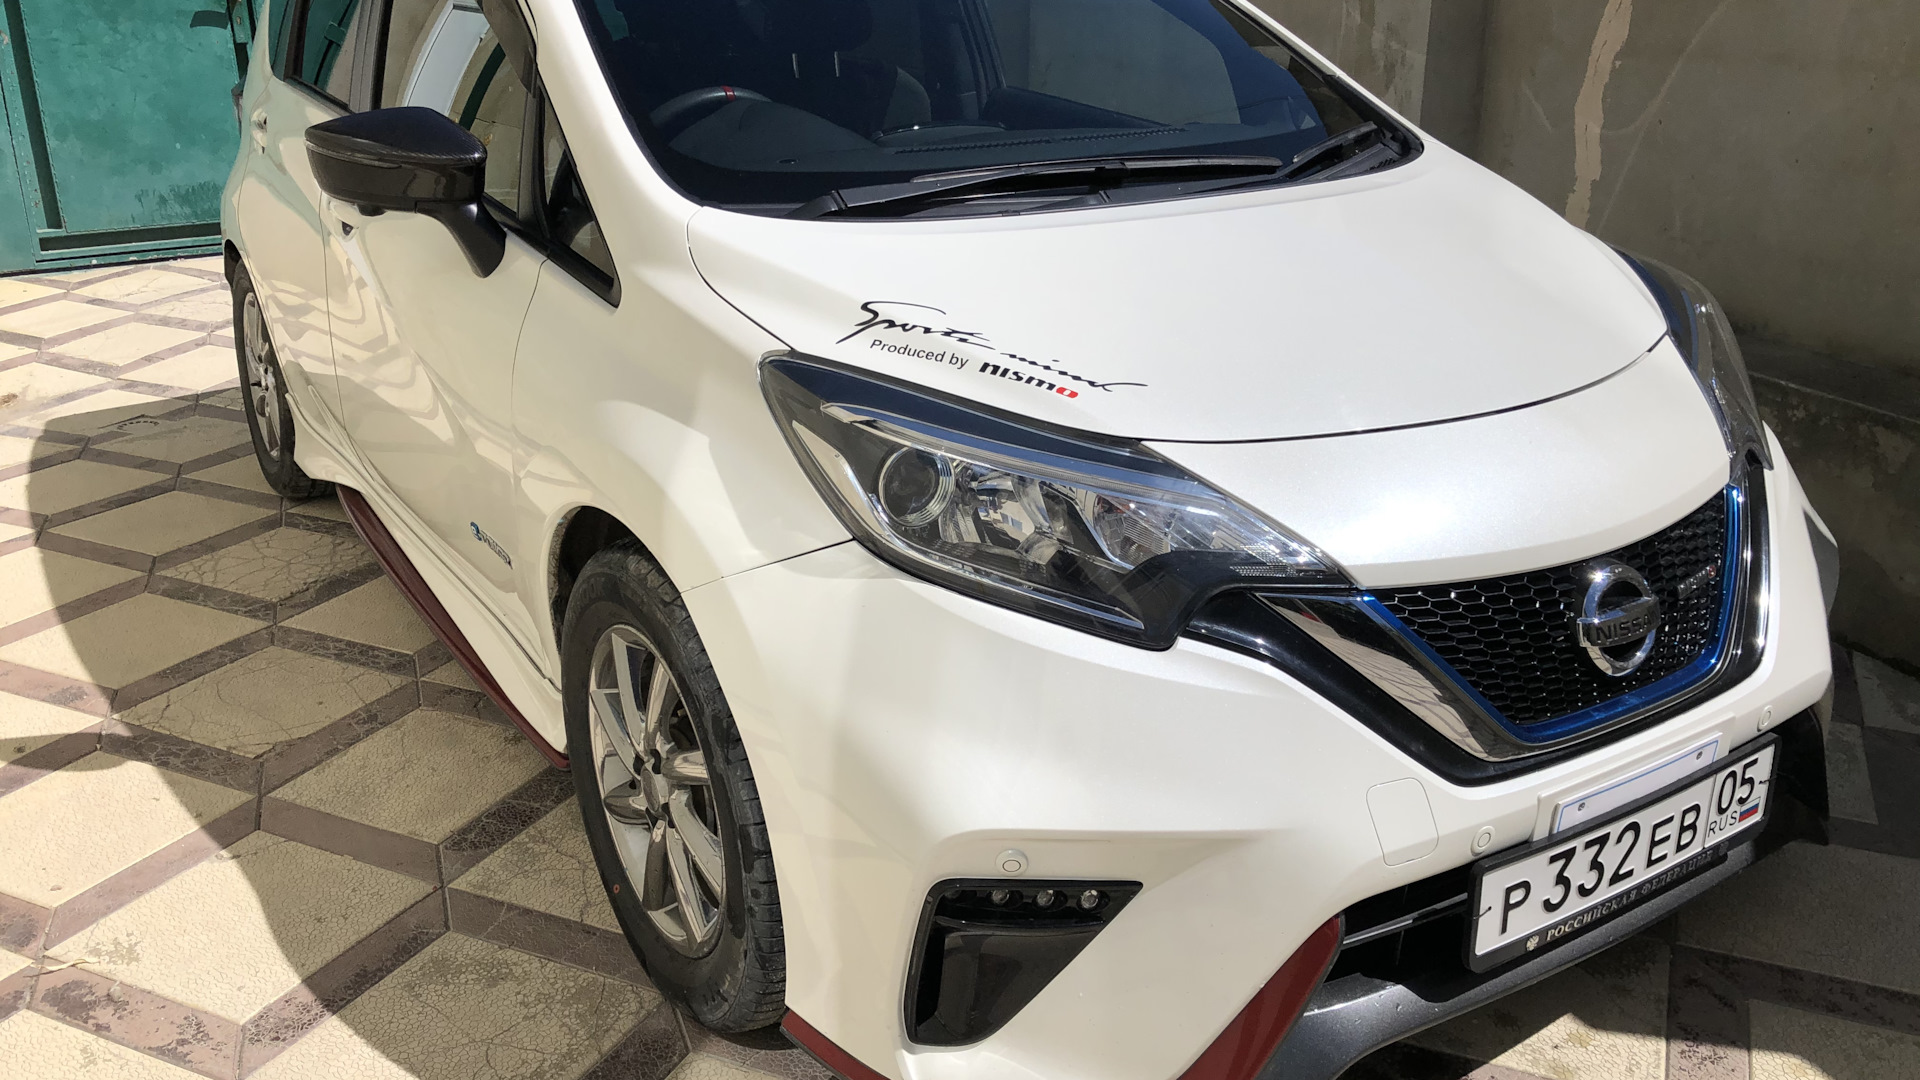 Nissan note 2018. Nissan Note 2018 e-Power белый. Nissan Note e-Power 2018. Nissan Note e Power 2018 Nismo.